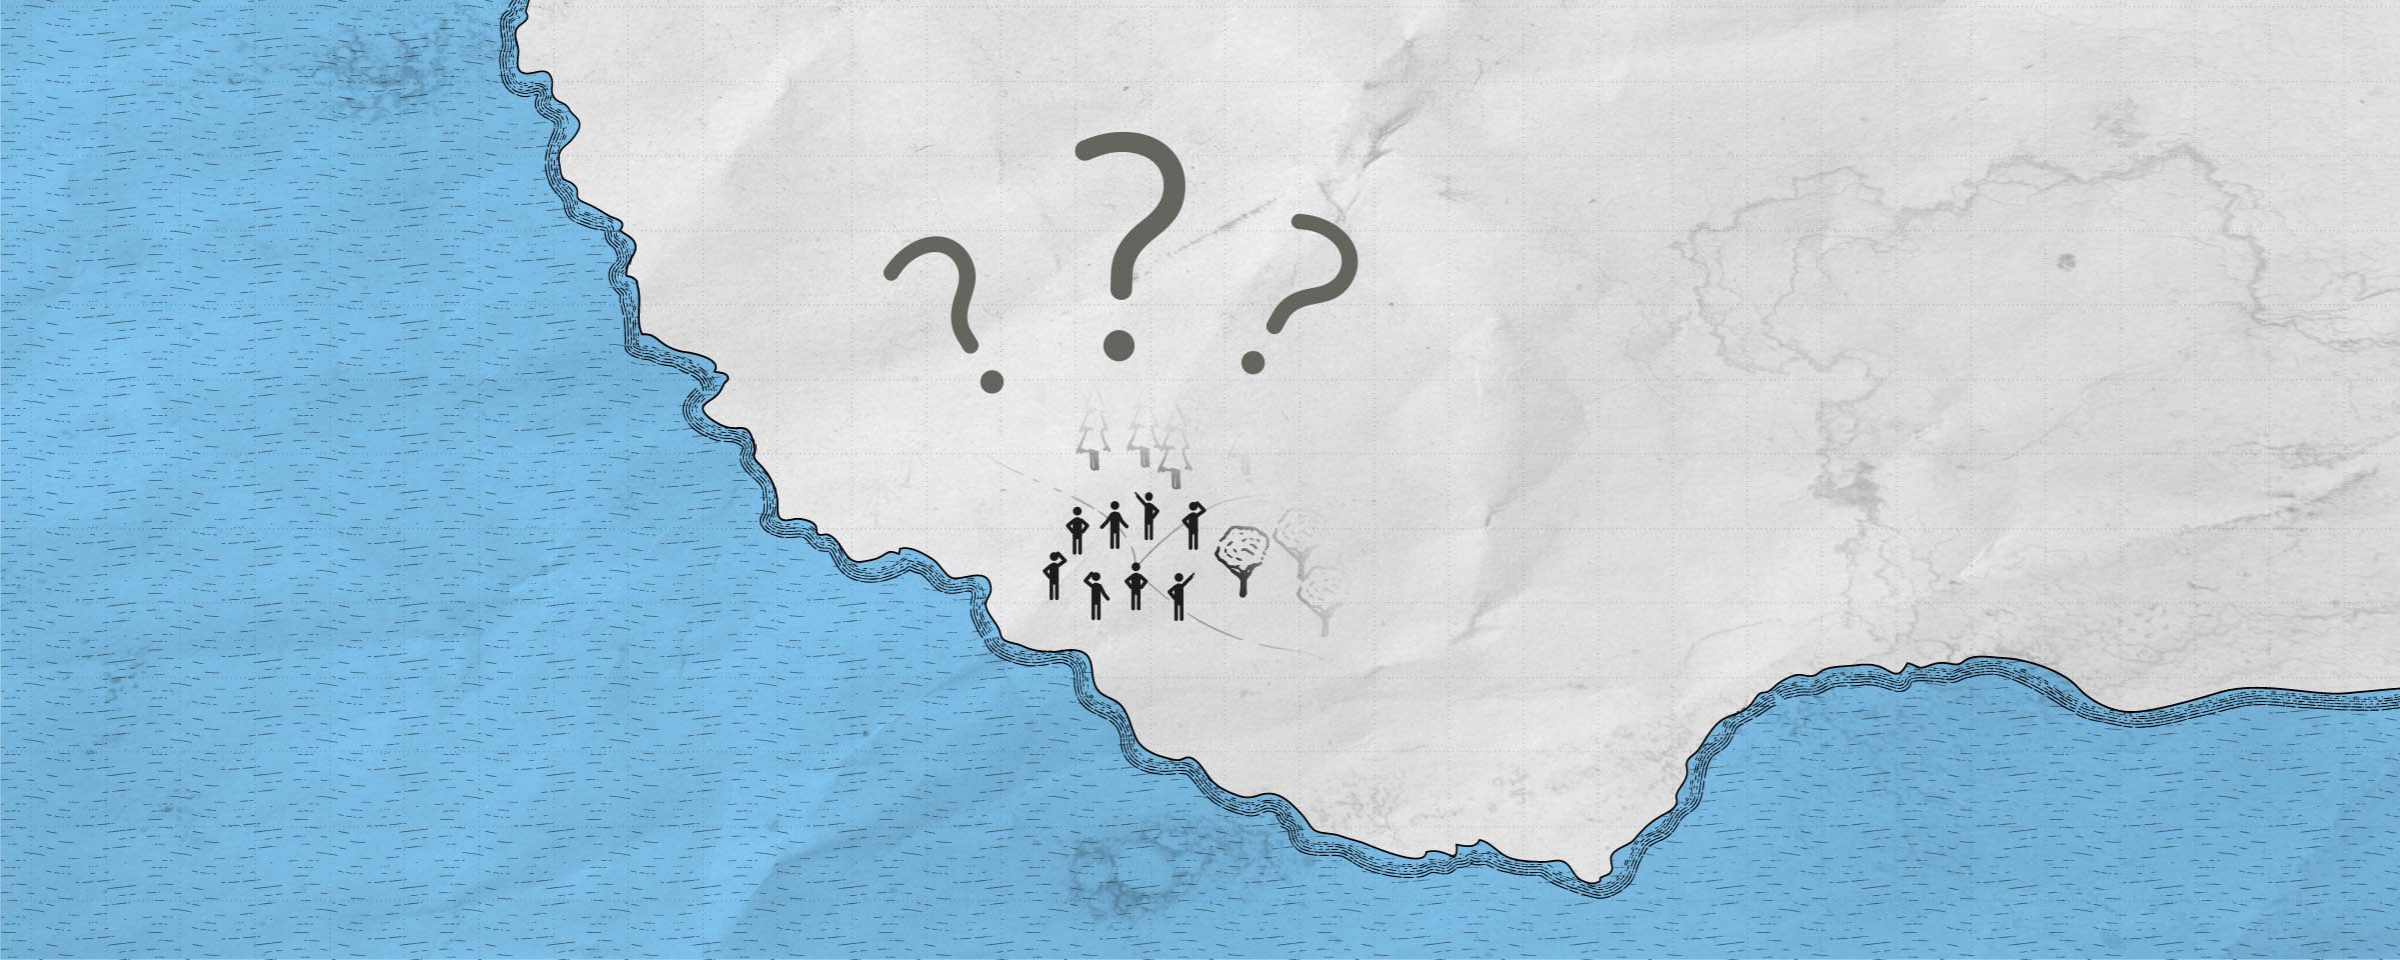 Animation: A group of people standing on the beach of an island asking questions